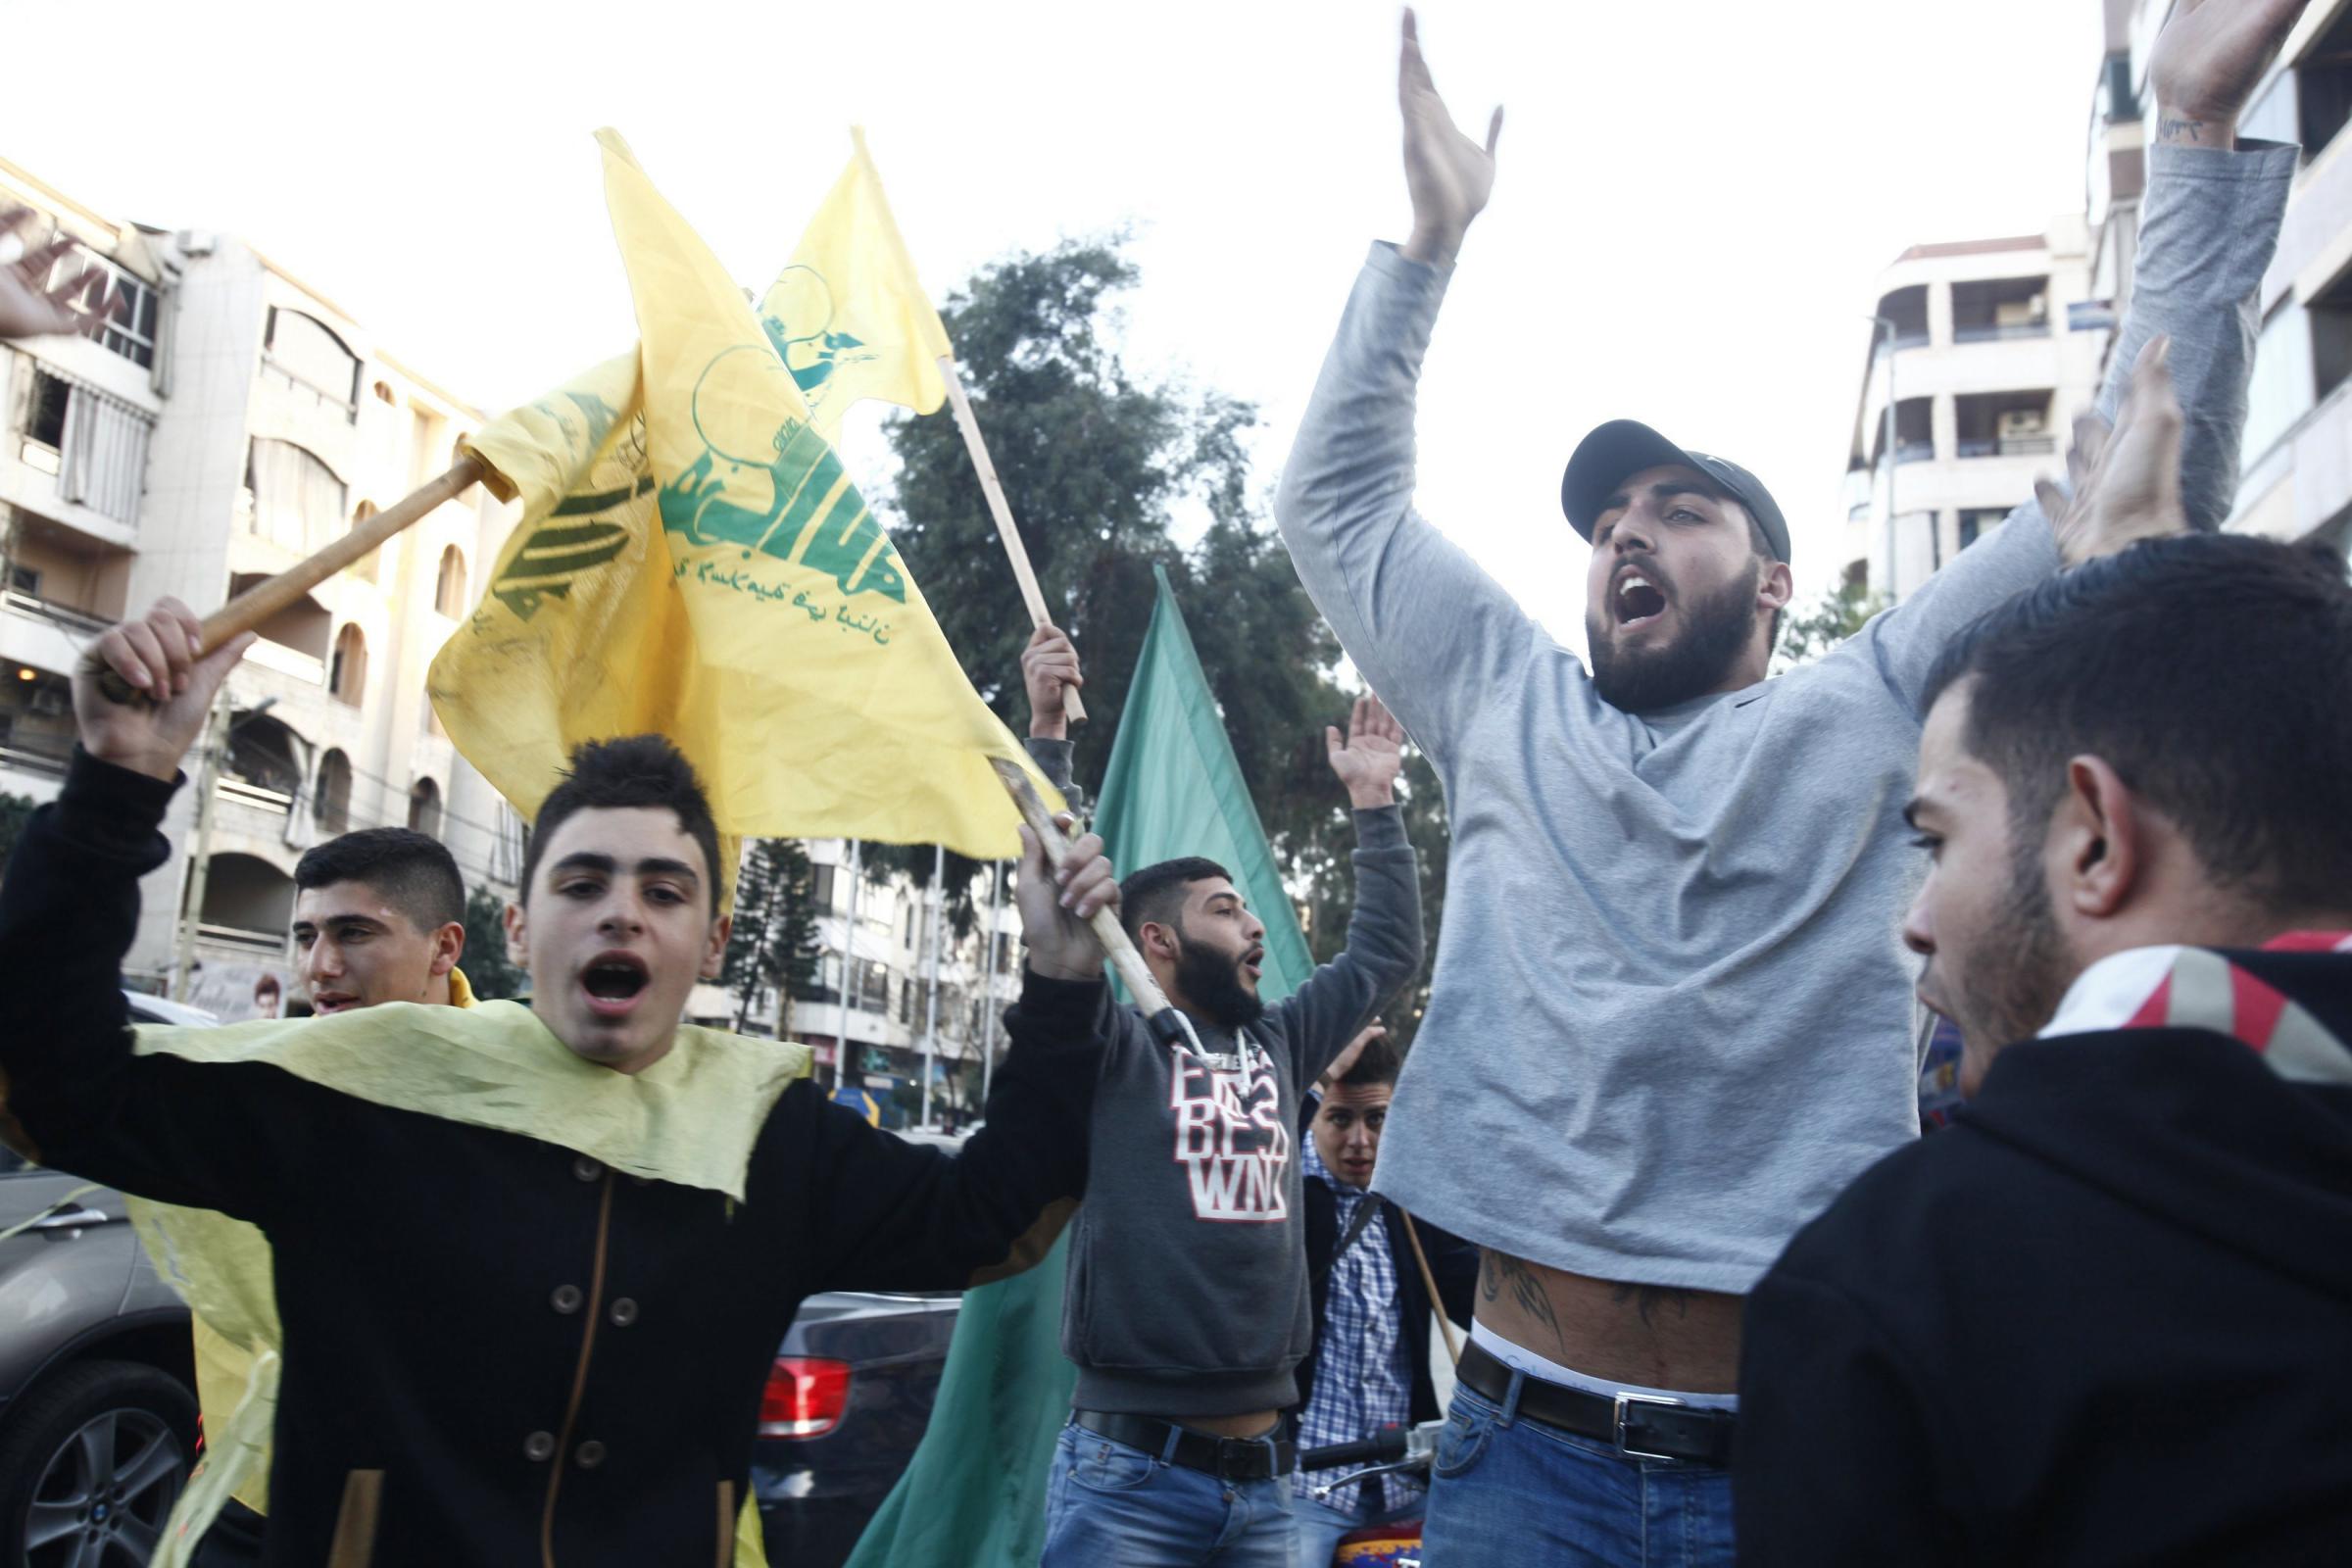 Hezbollah to be completely banned in Britain under anti-terror laws